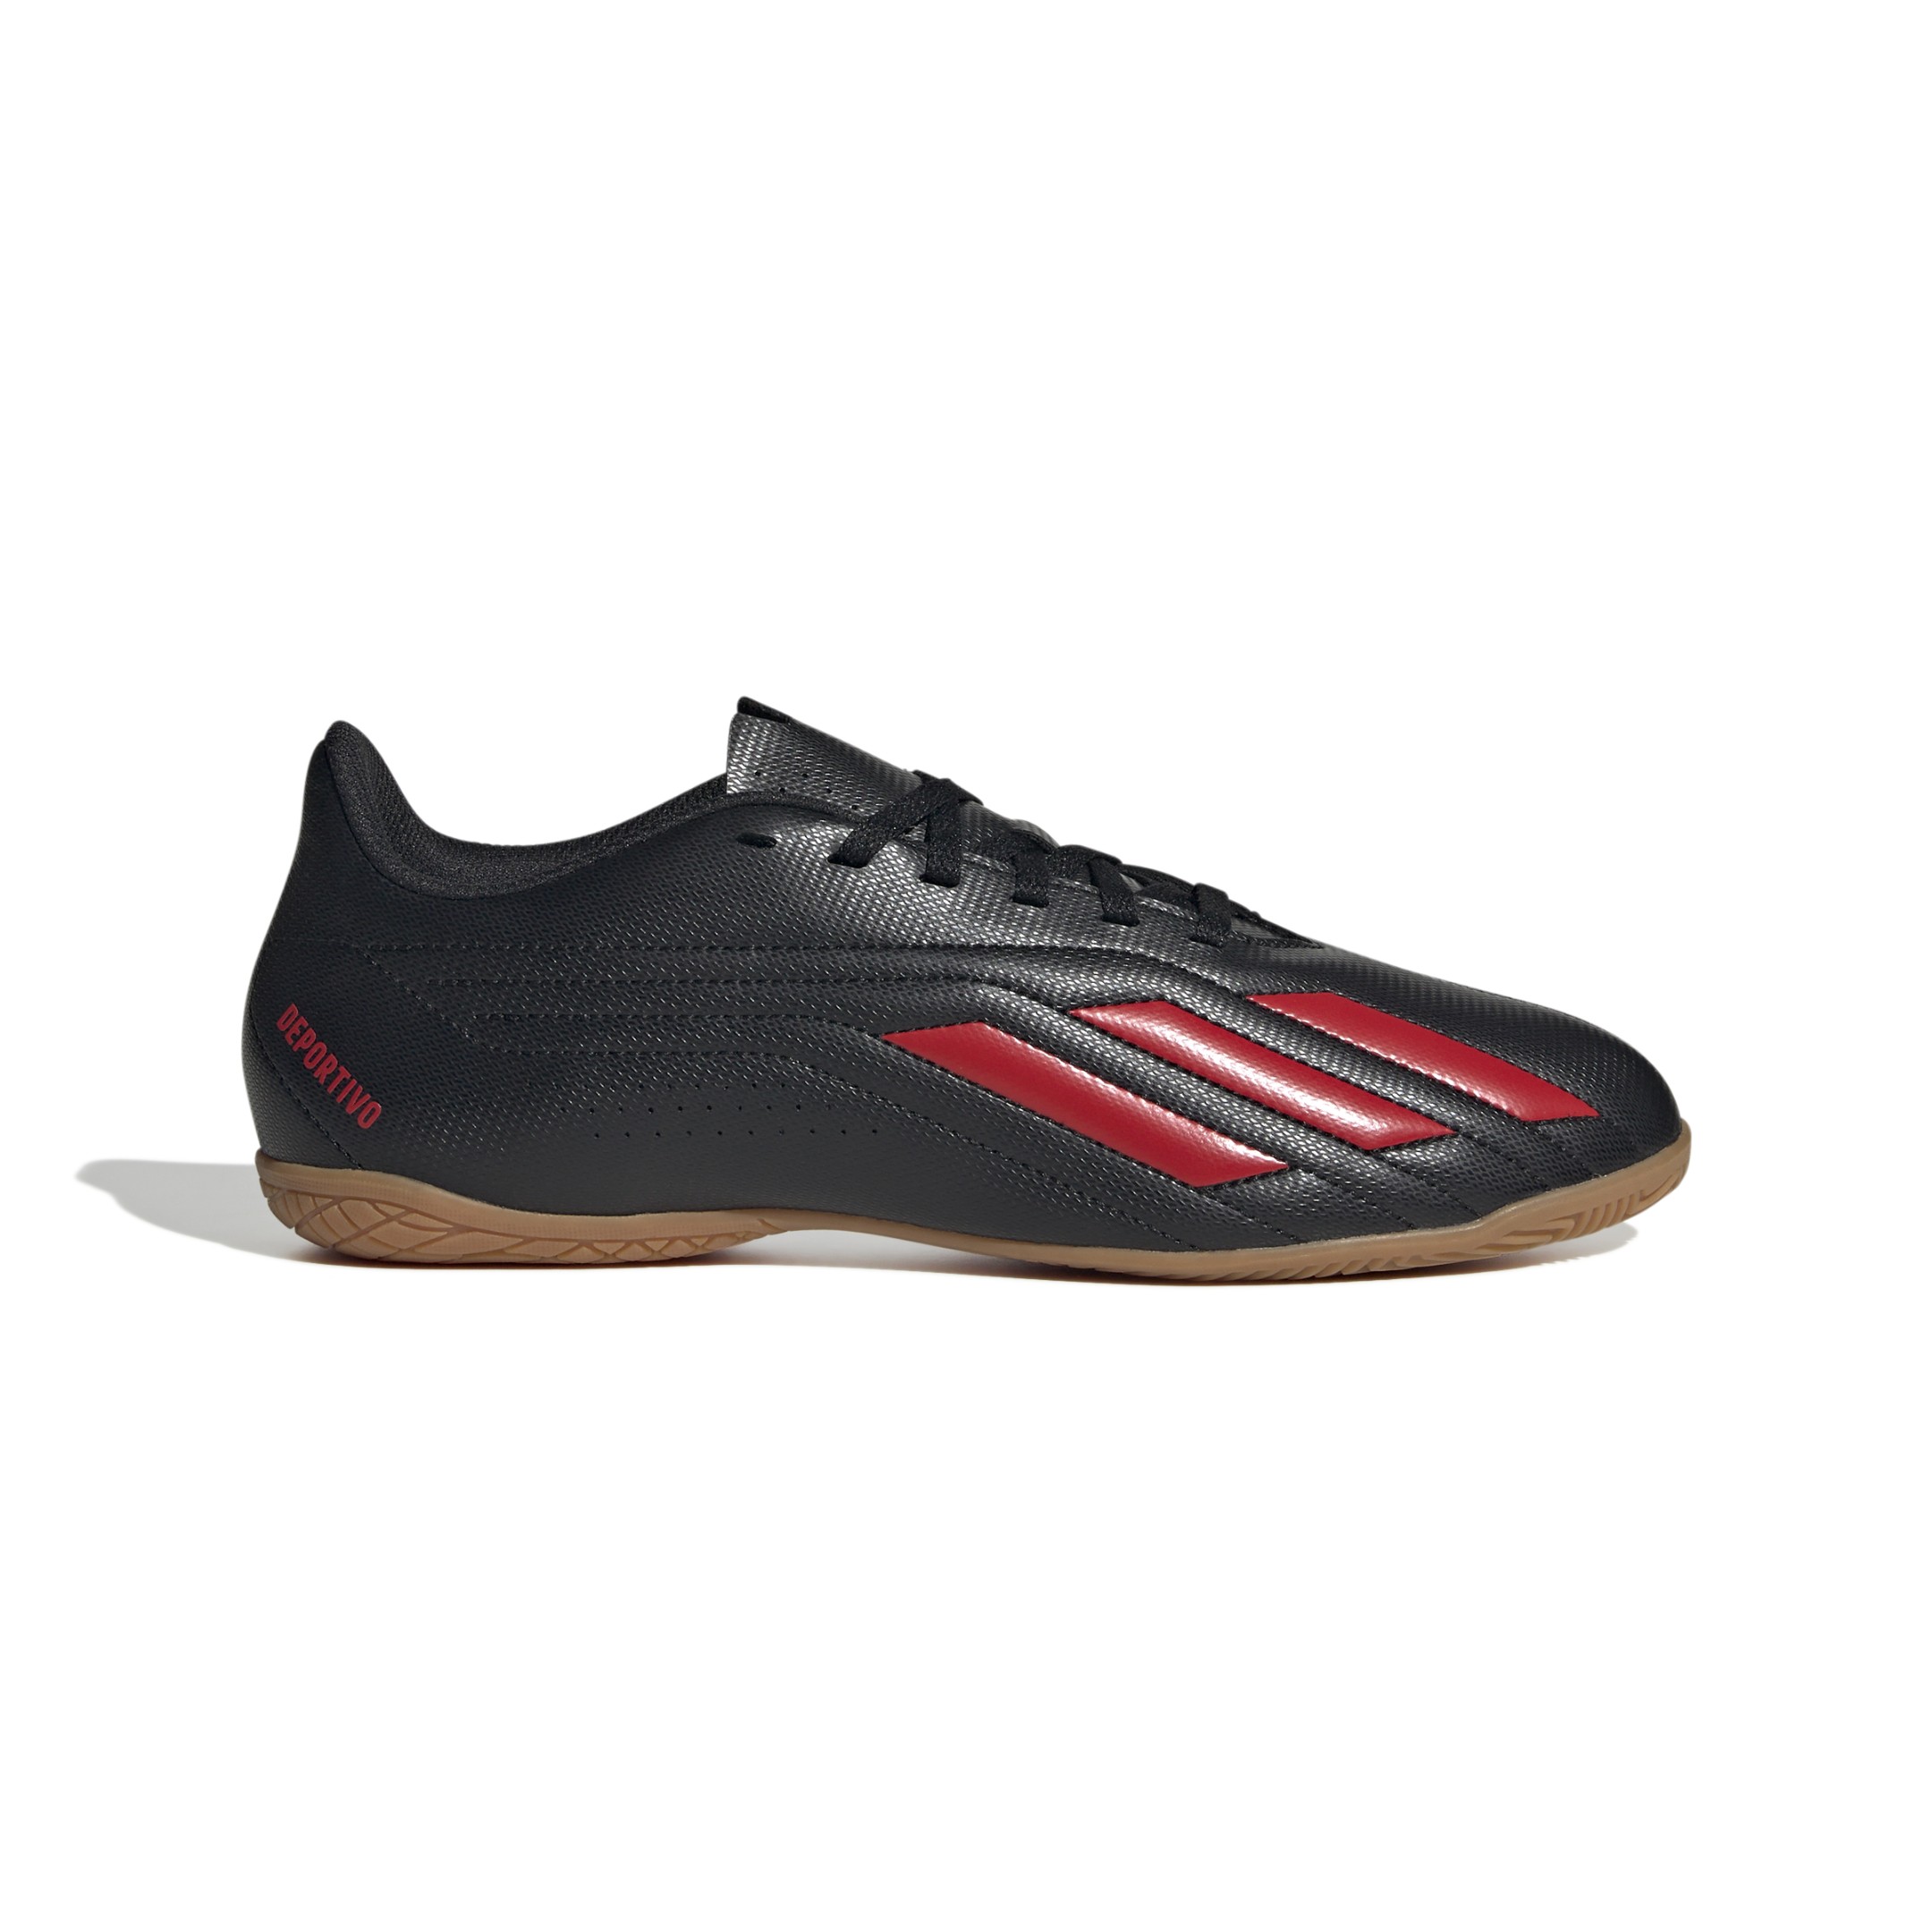 DEPORTIVO II IN CORE BLACK / RED / RED